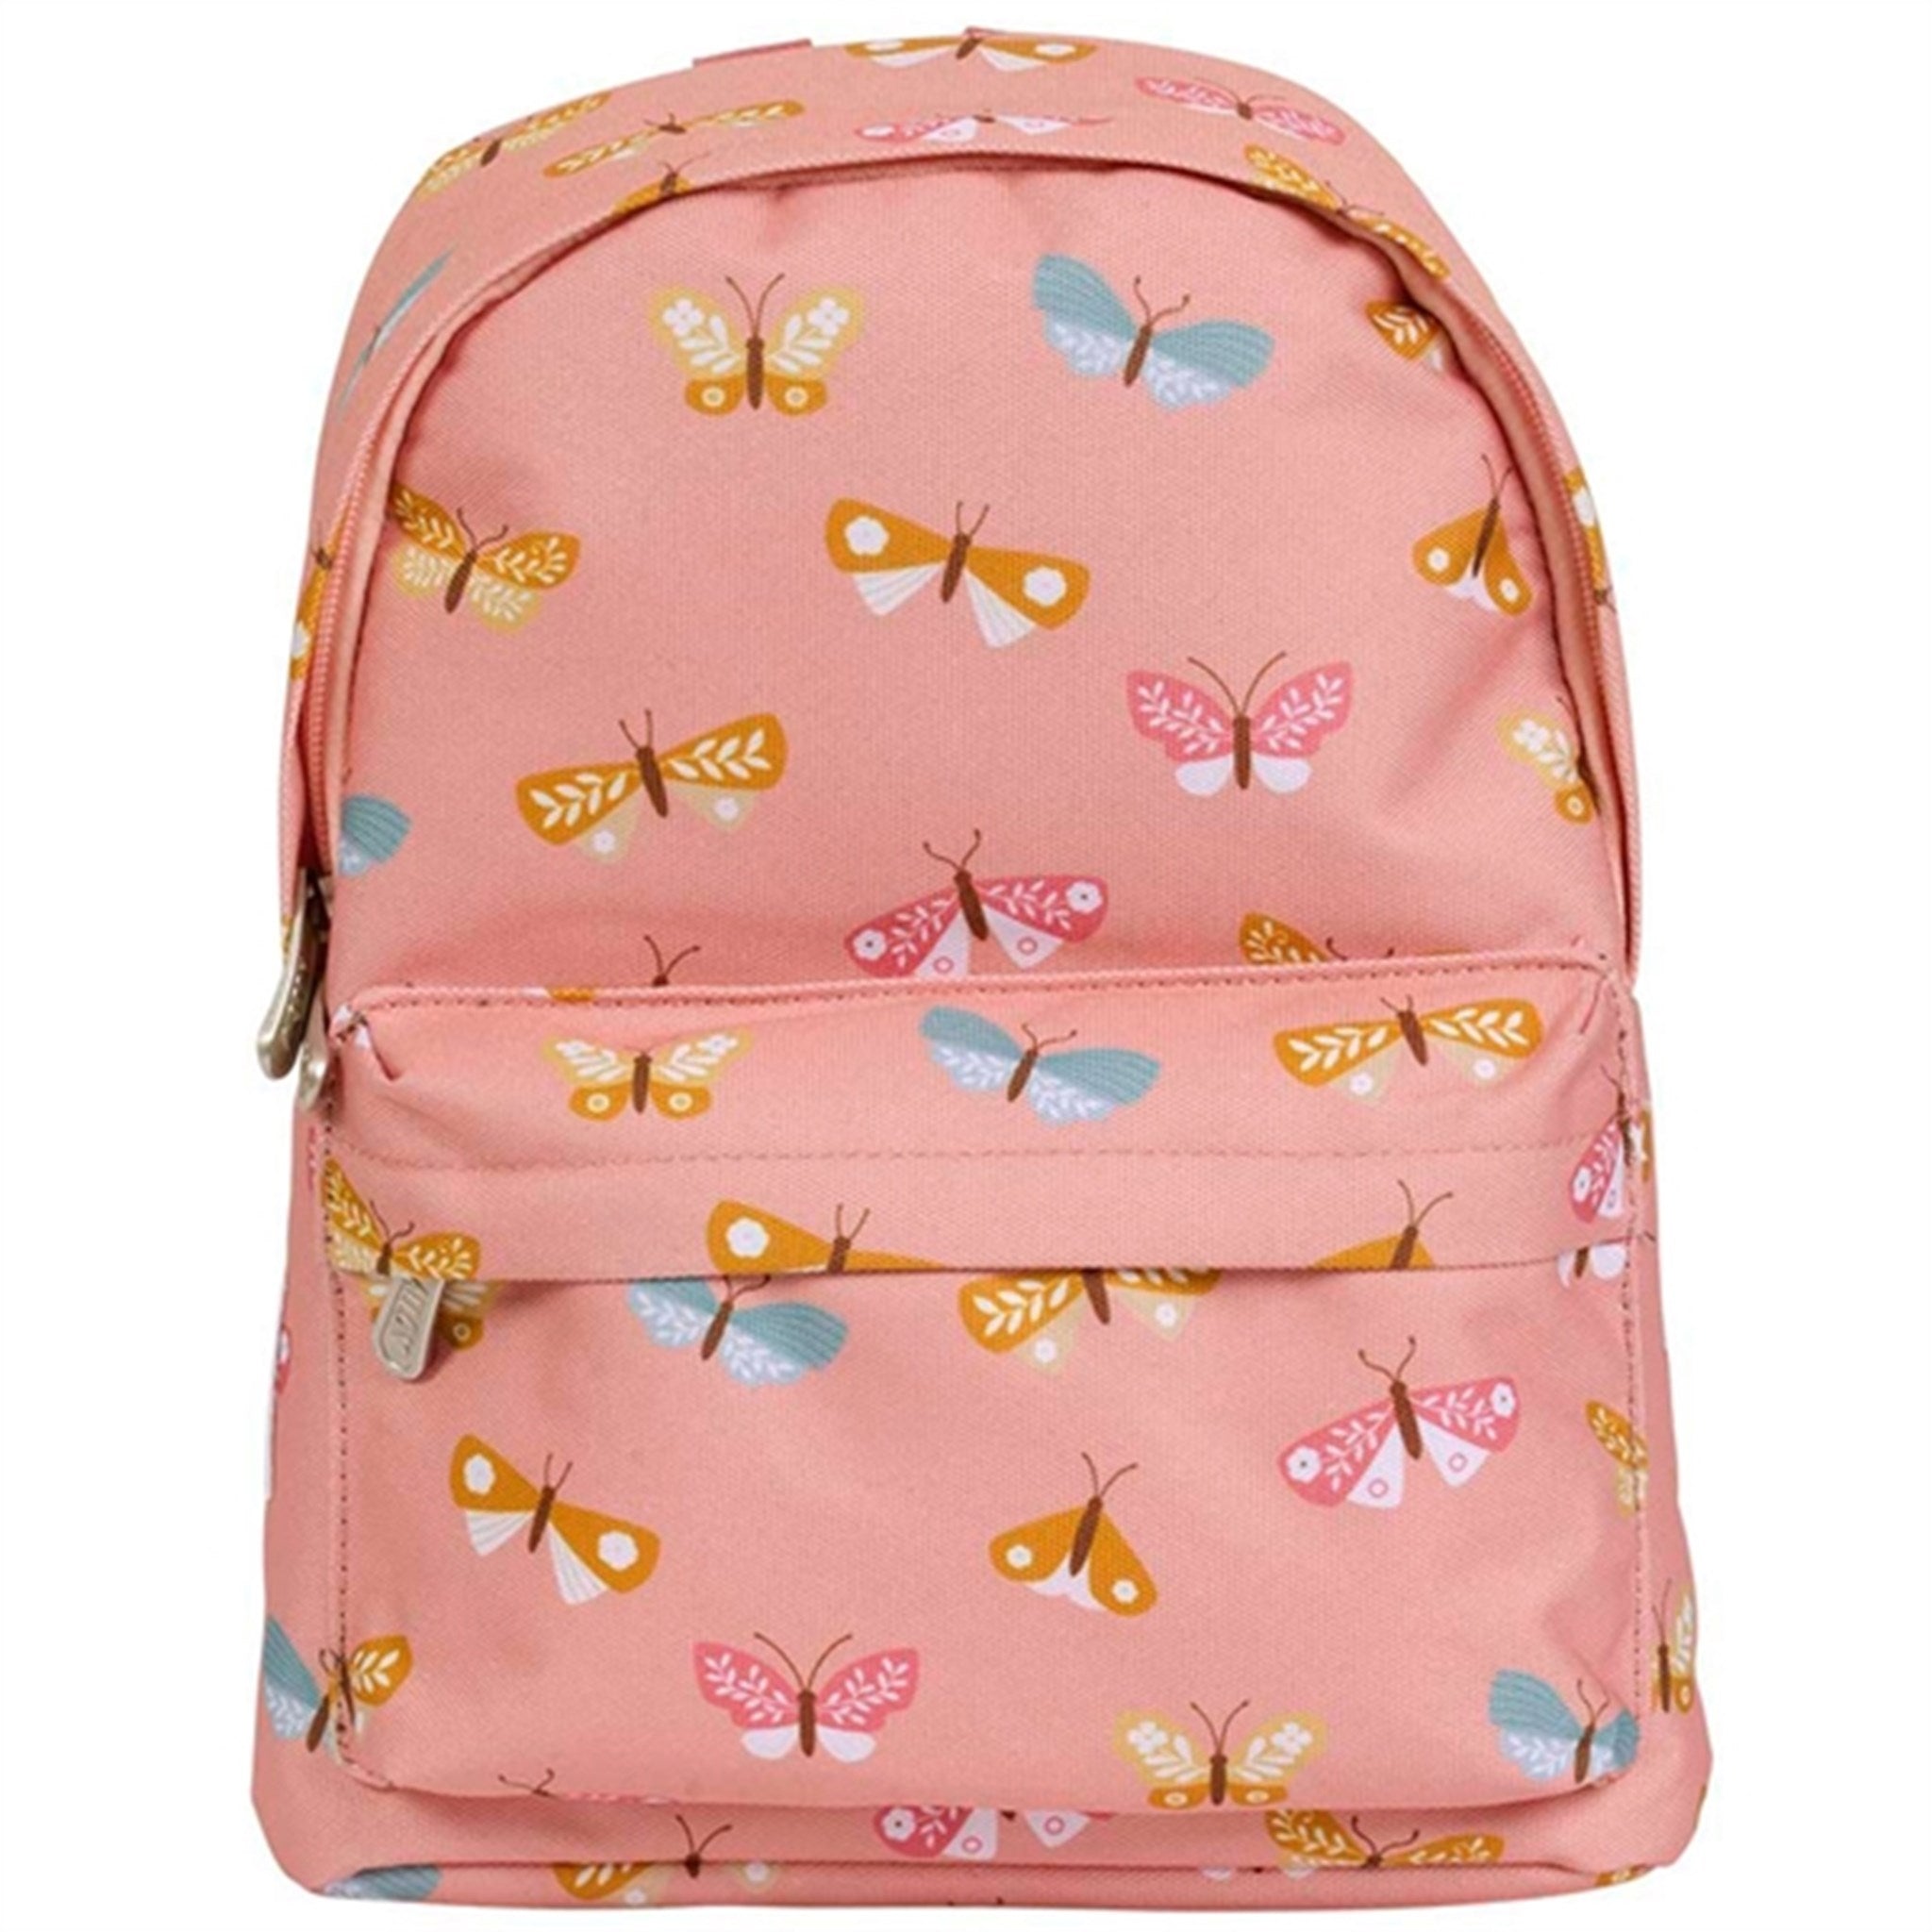 A Little Lovely Company Backpack Small Butterflies